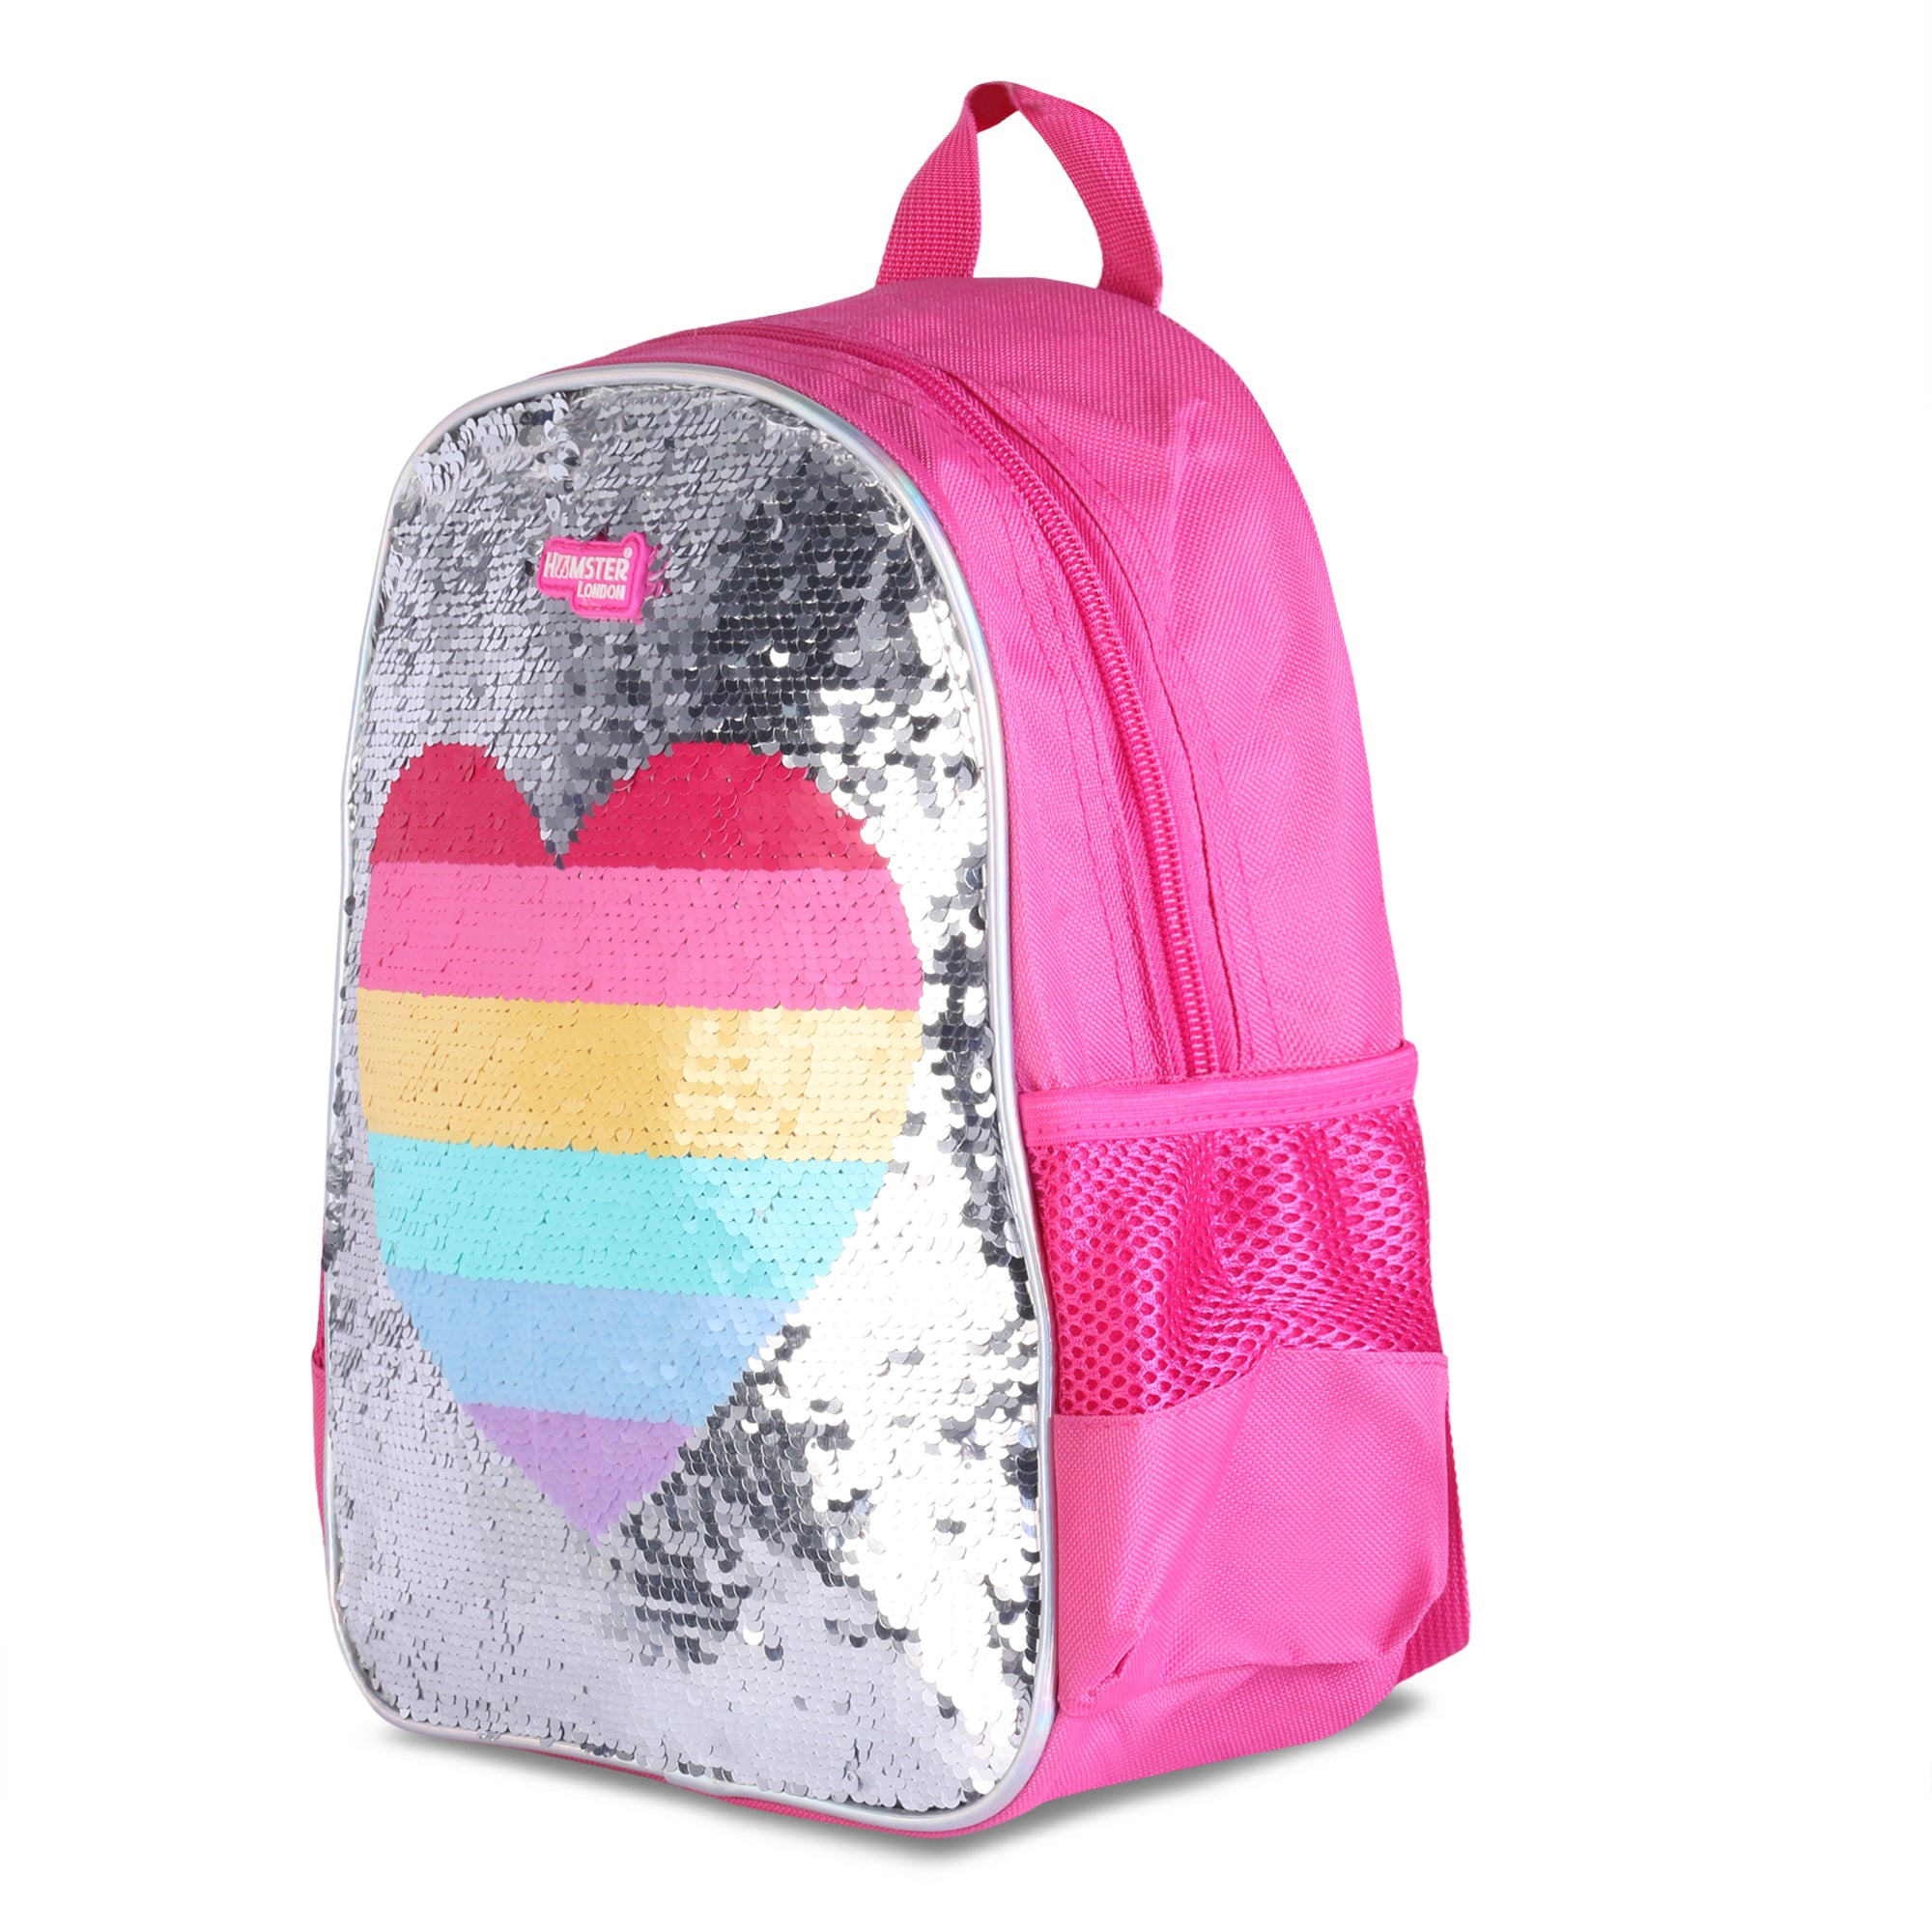 Hamster Pink Heart Sequence Backpack